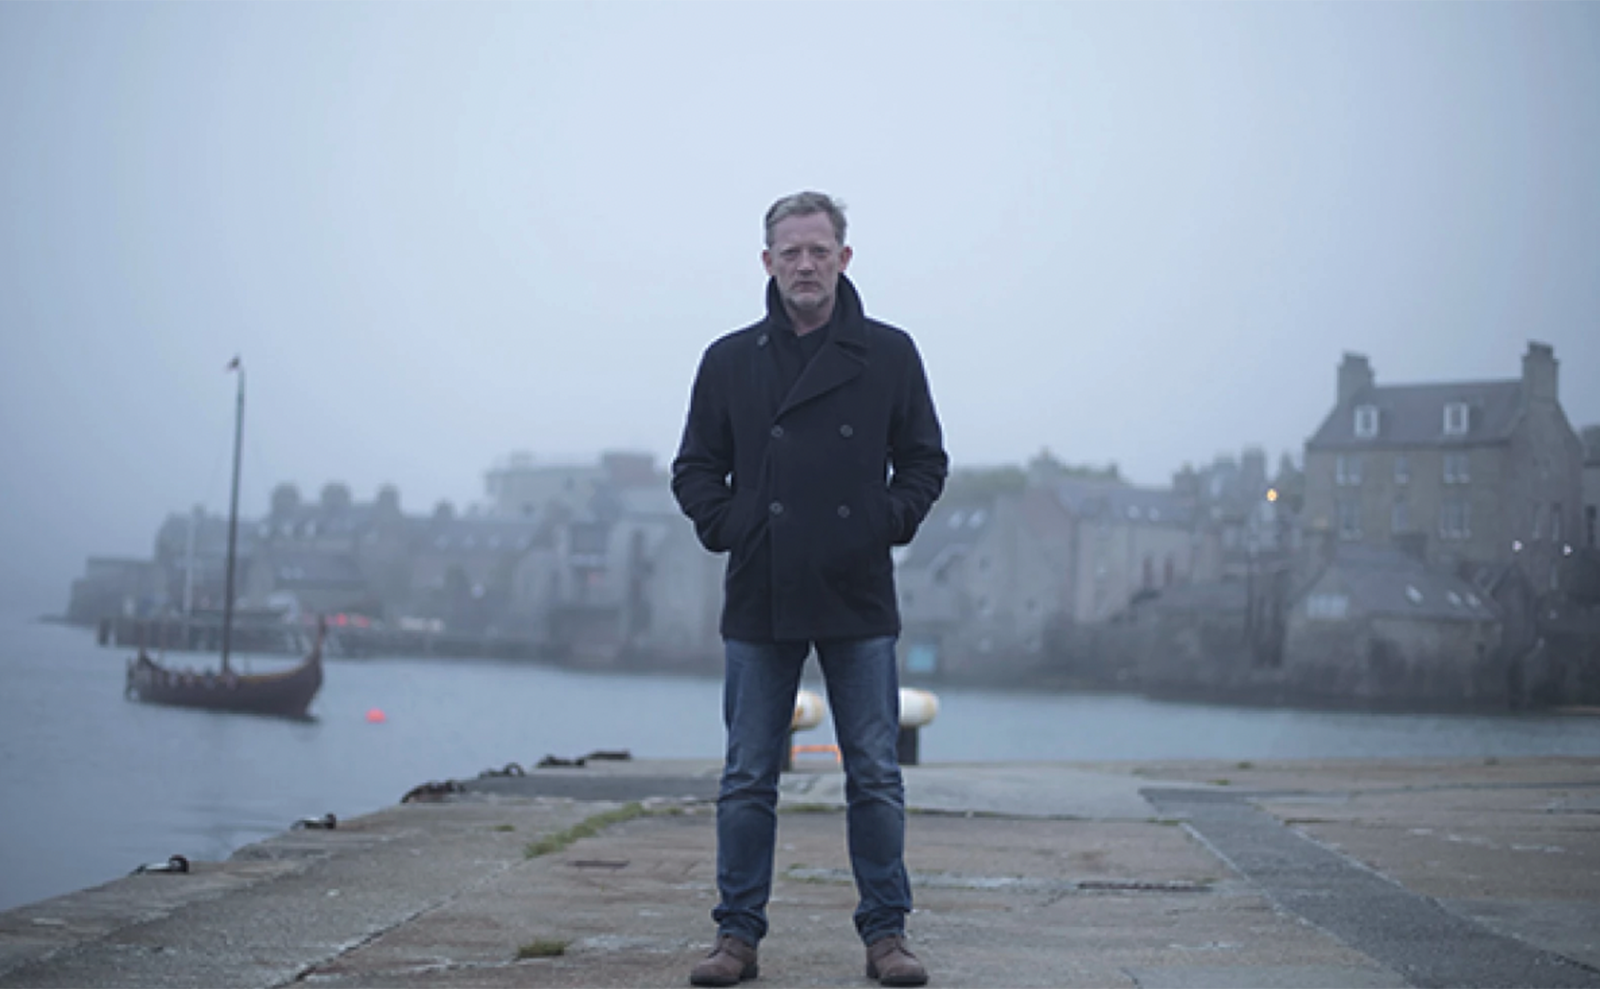  photo of actor douglas henshall in a blue coat standing on a dock by the ocean